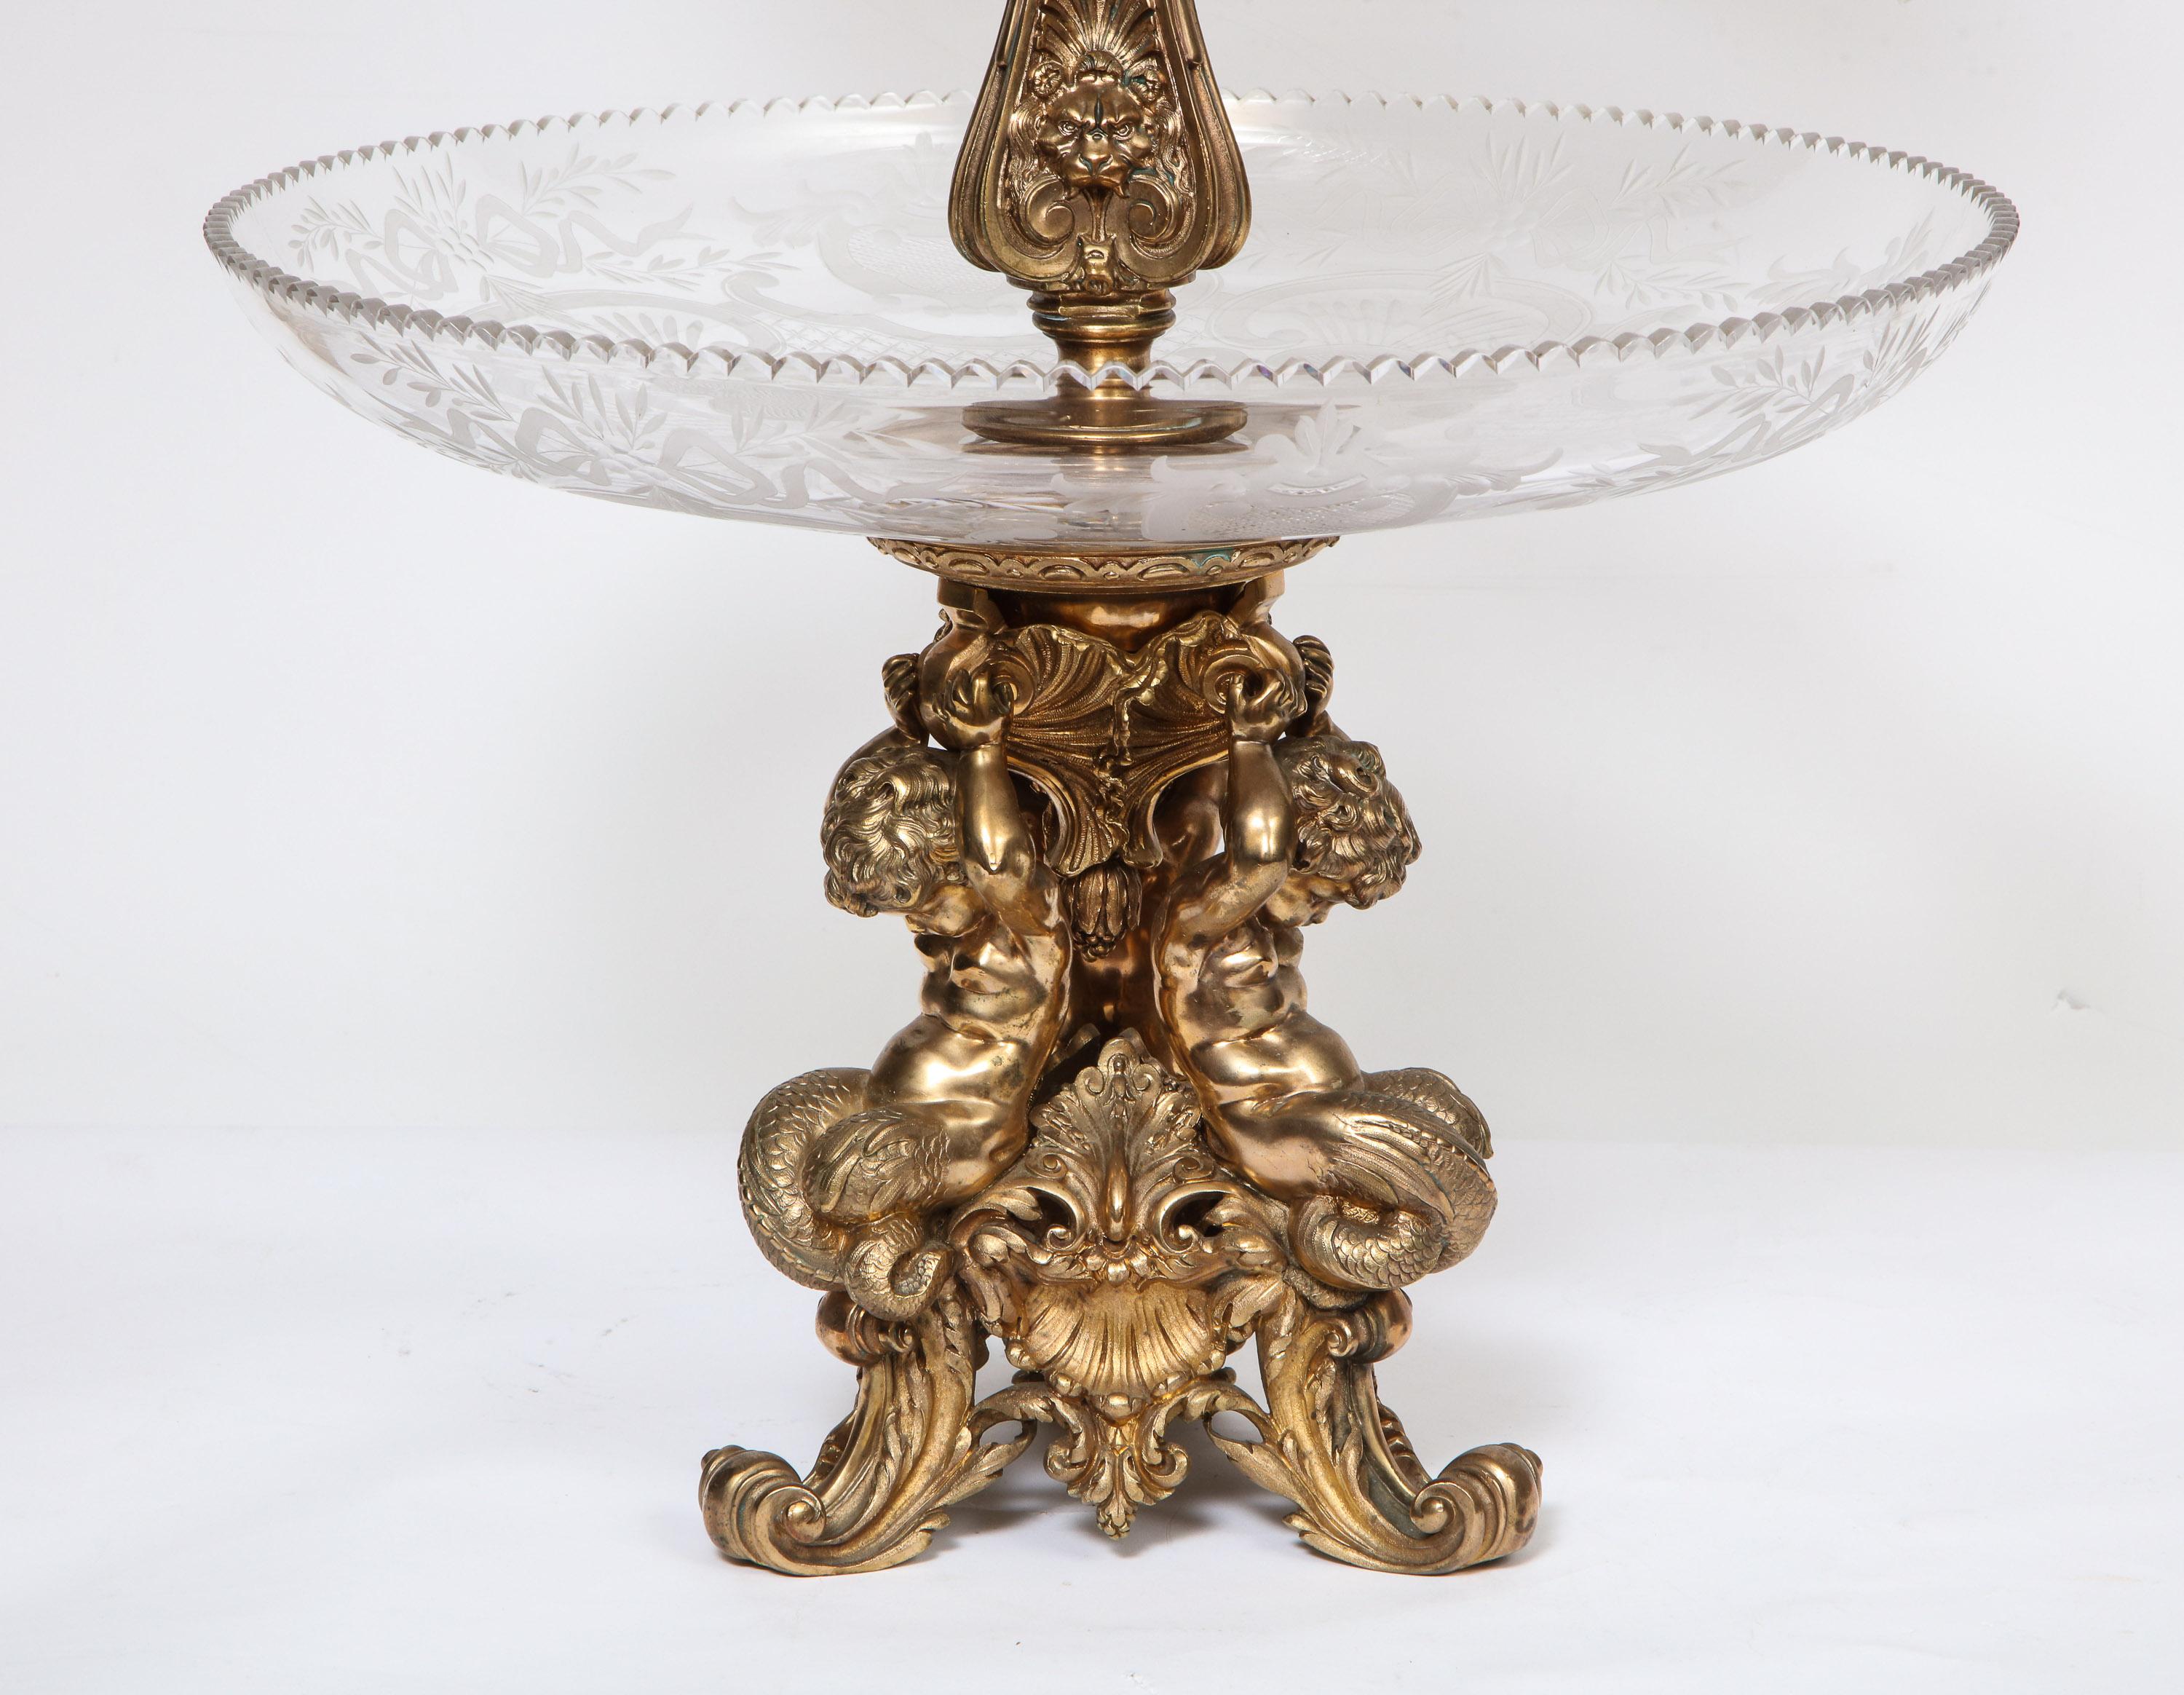 Napoleon III Large French Silvered Bronze and Cut Crystal Allegorical Three-Tier Centerpiece